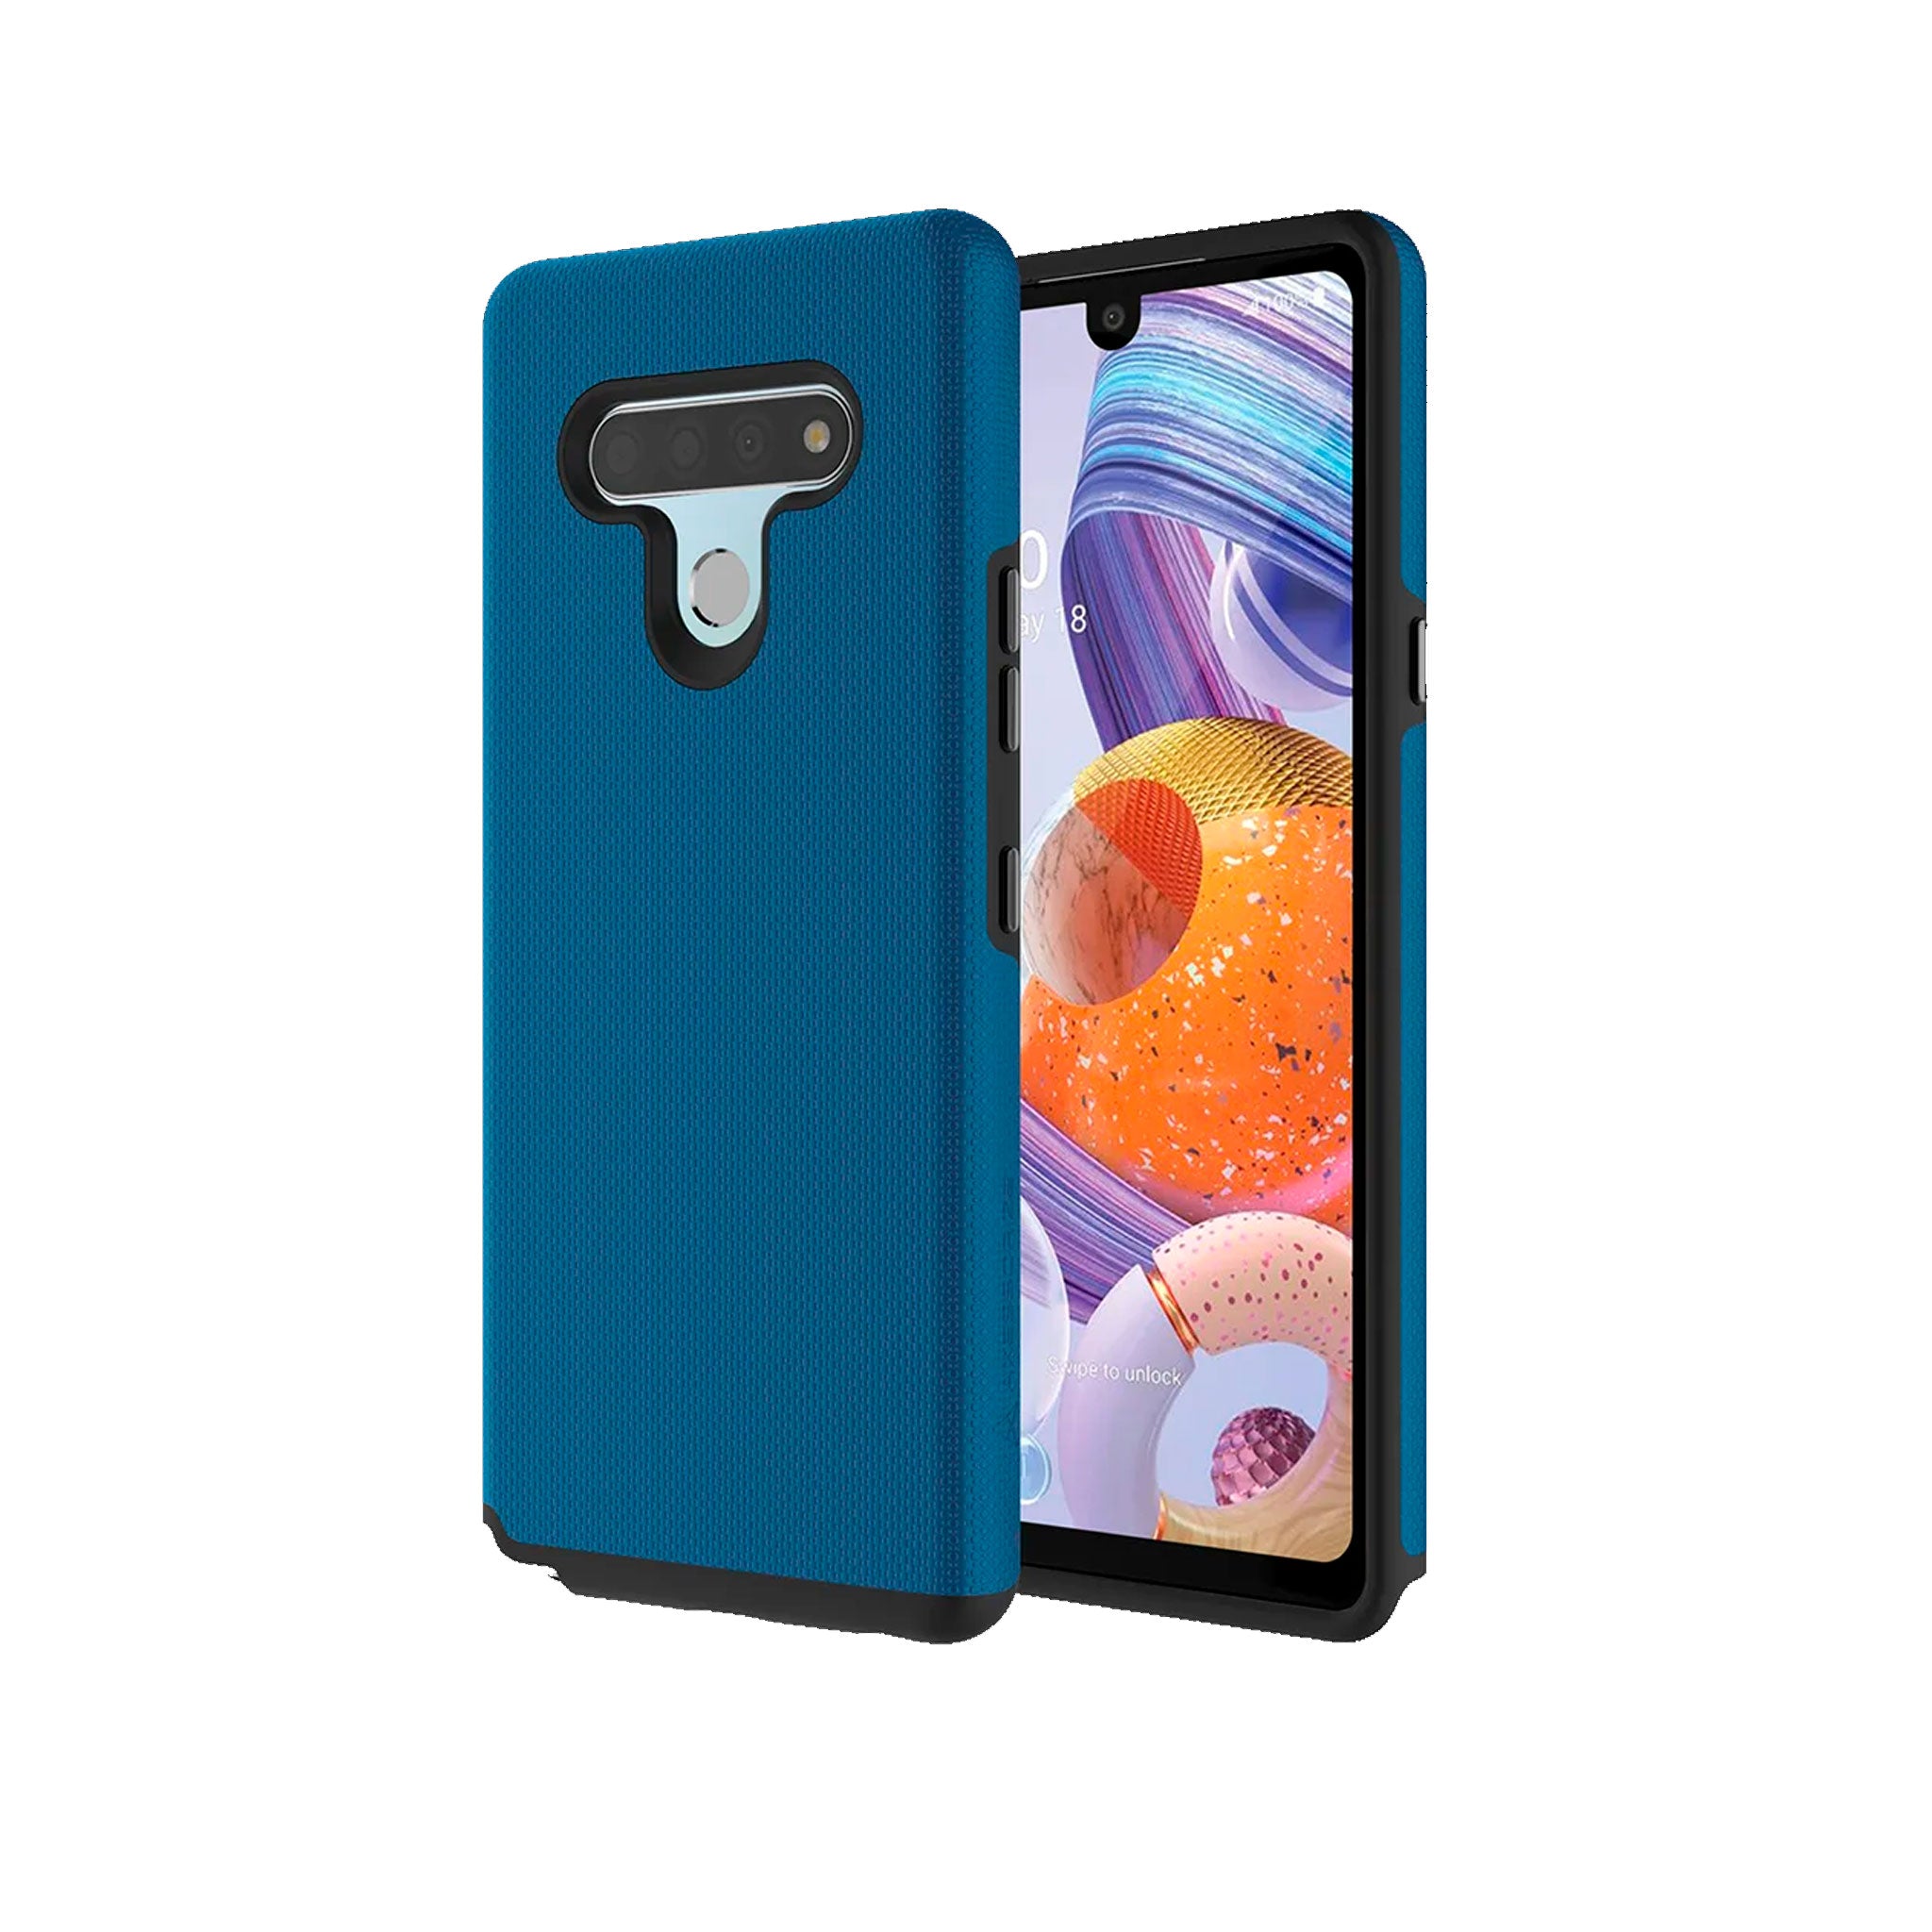 Axessorize - Protech Case For Lg Stylo 6 - Blue